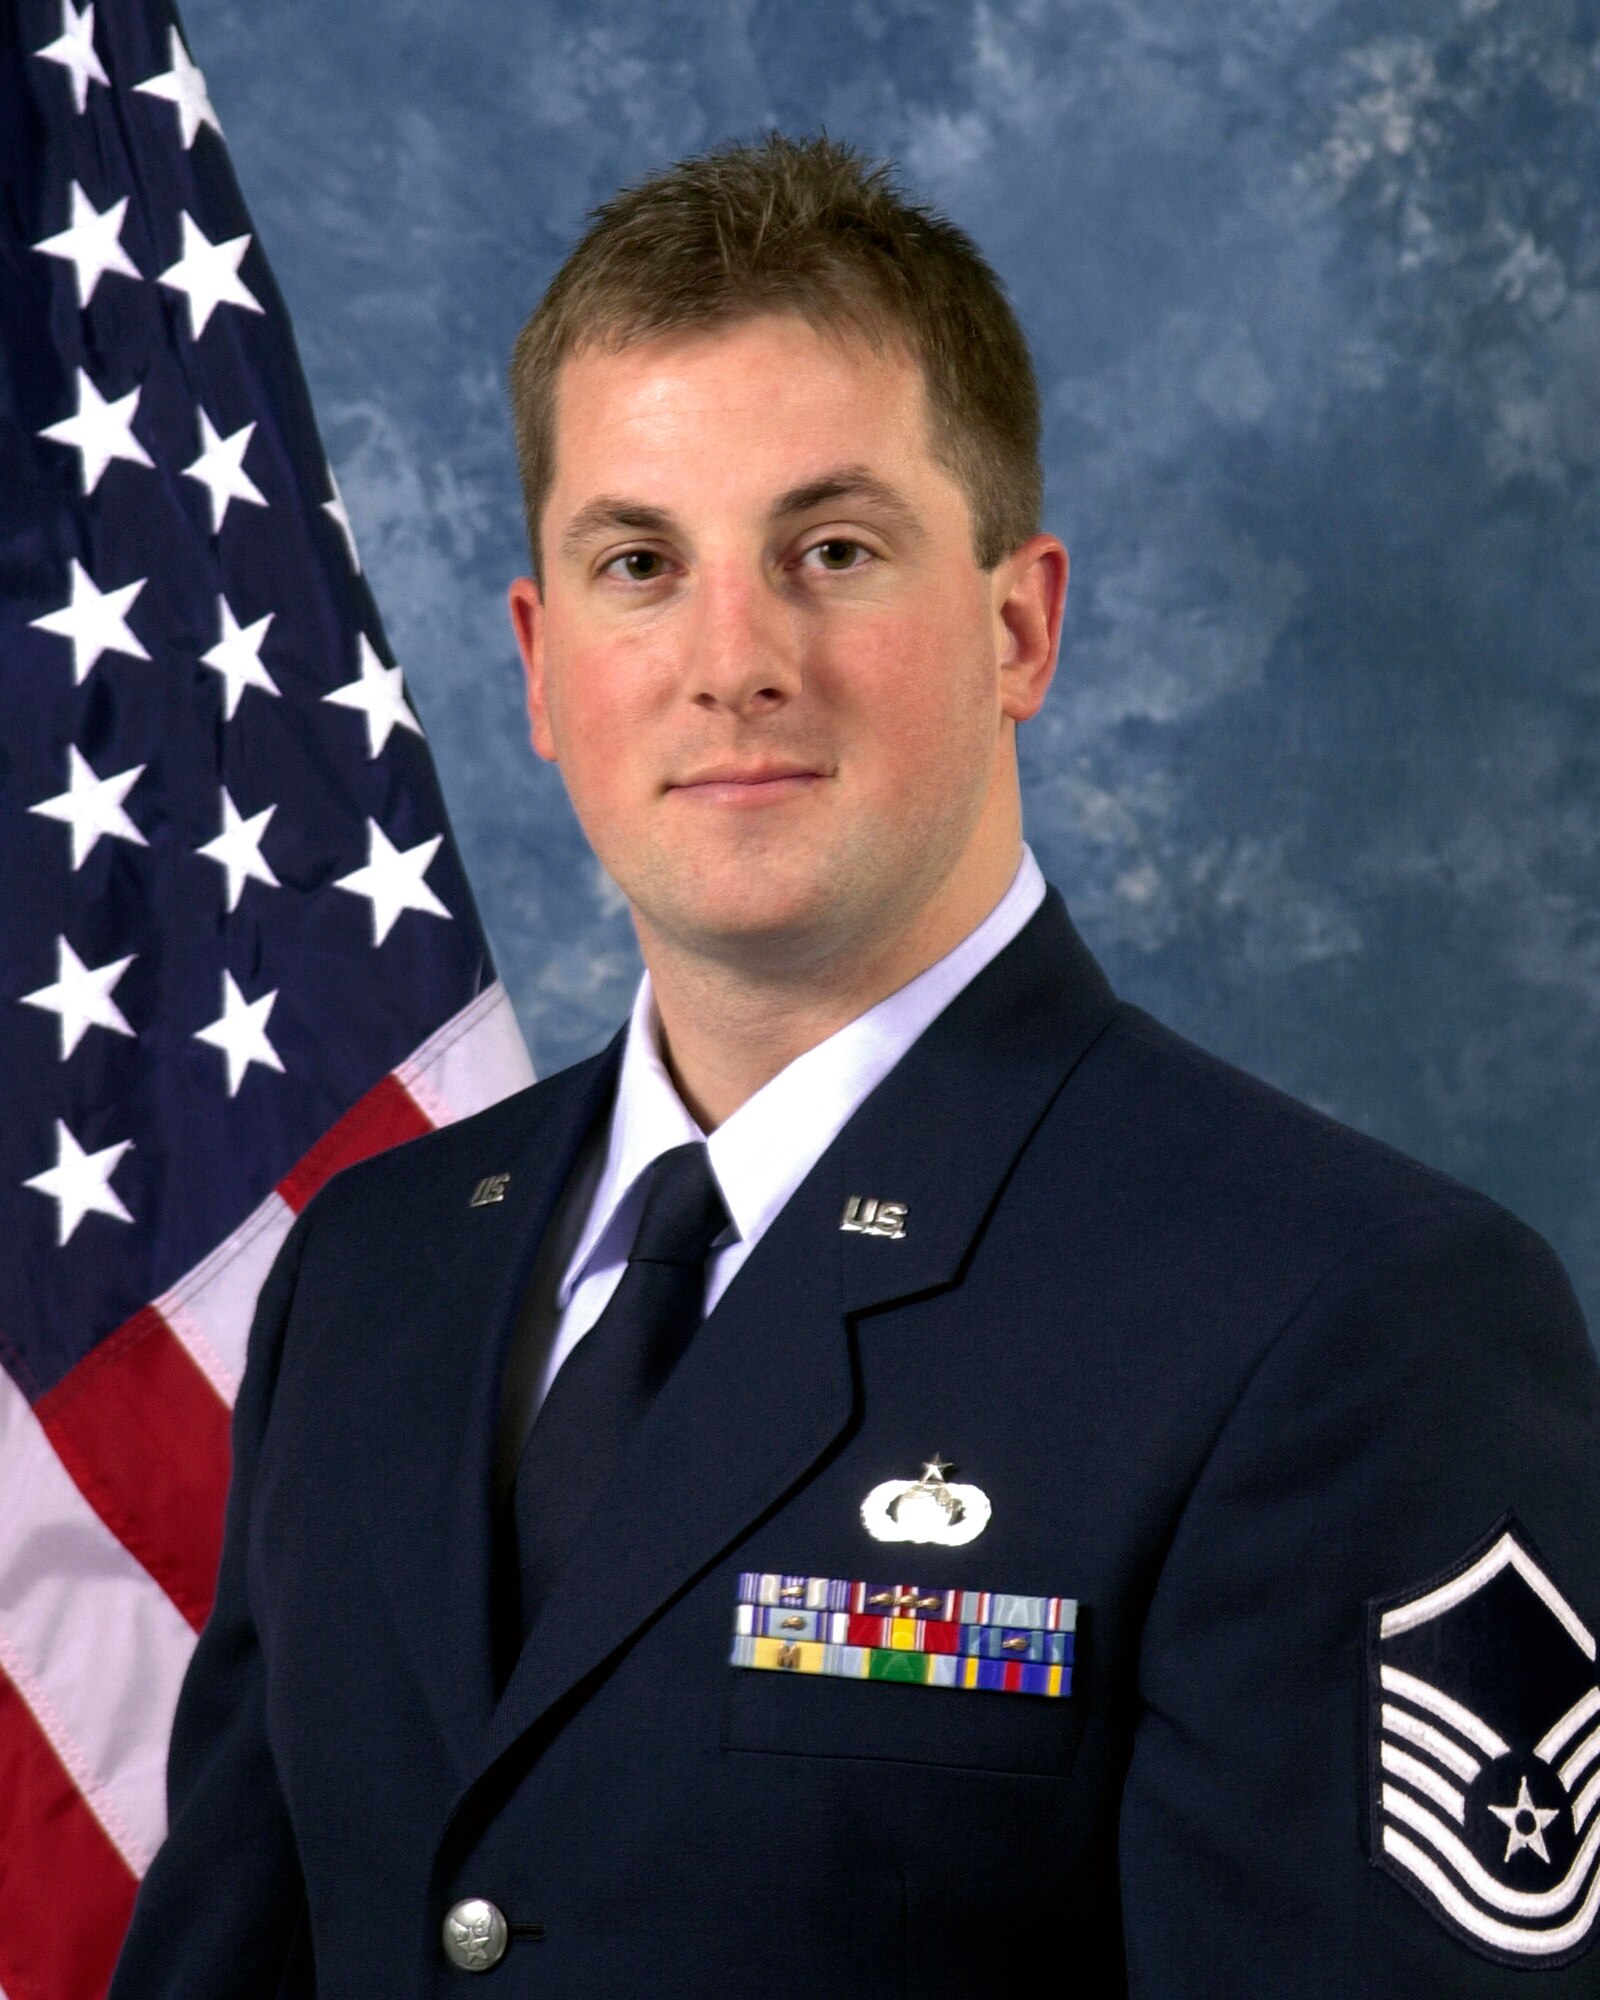 Fallen Airman Master Sergeant Patrick Lalonde. You will be missed!